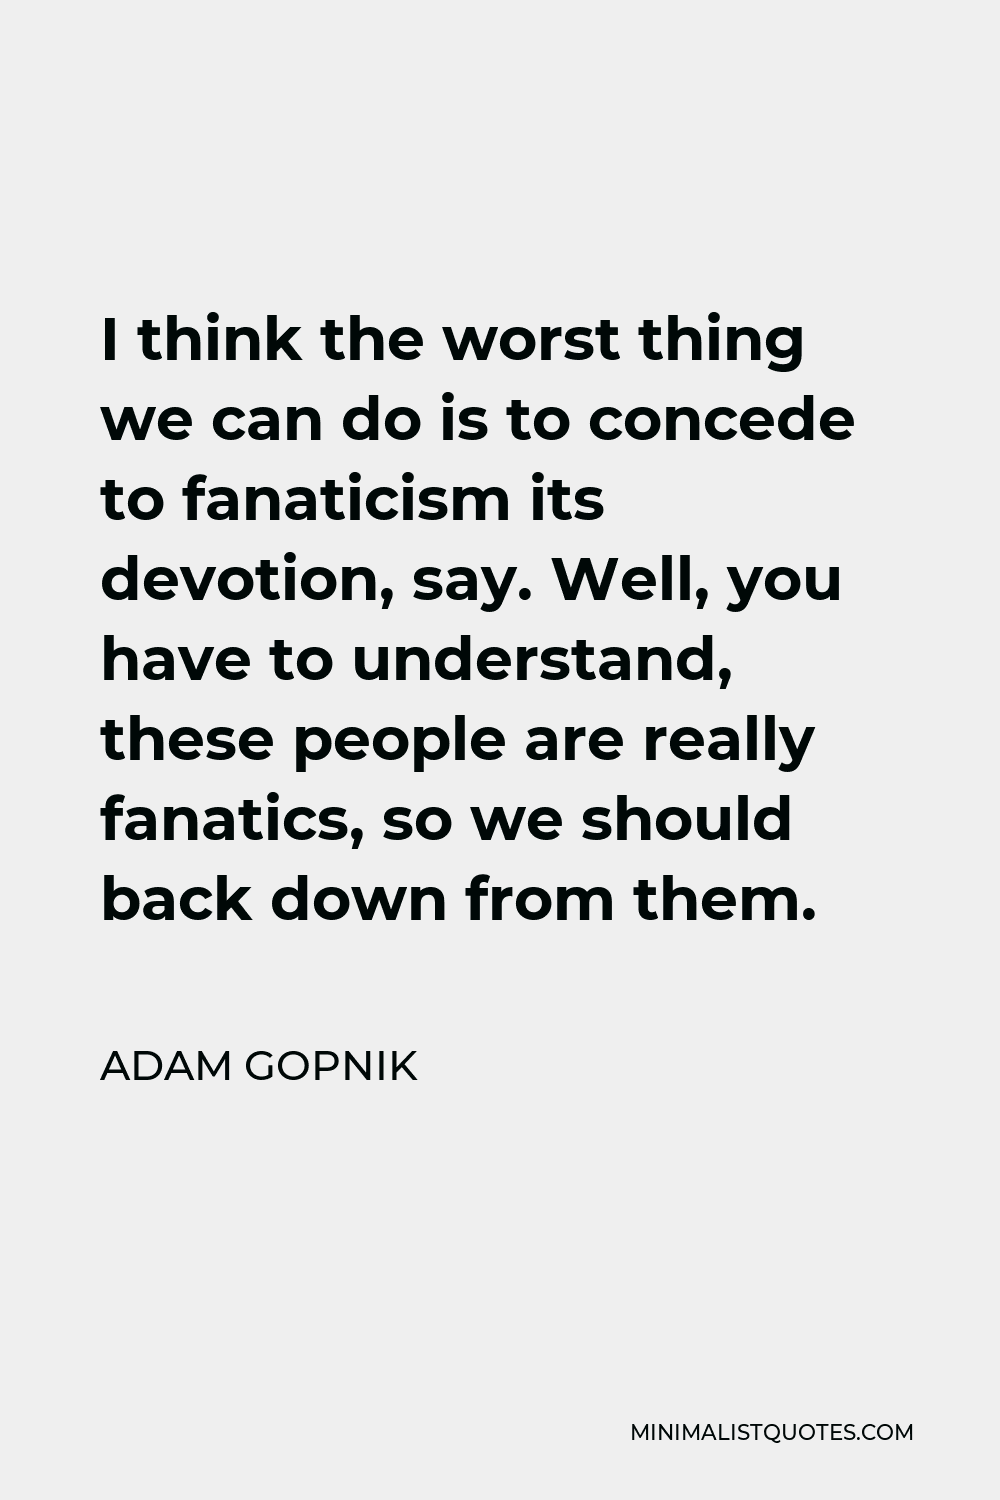 Adam Gopnik Quote - I think the worst thing we can do is to concede to fanaticism its devotion, say. Well, you have to understand, these people are really fanatics, so we should back down from them.